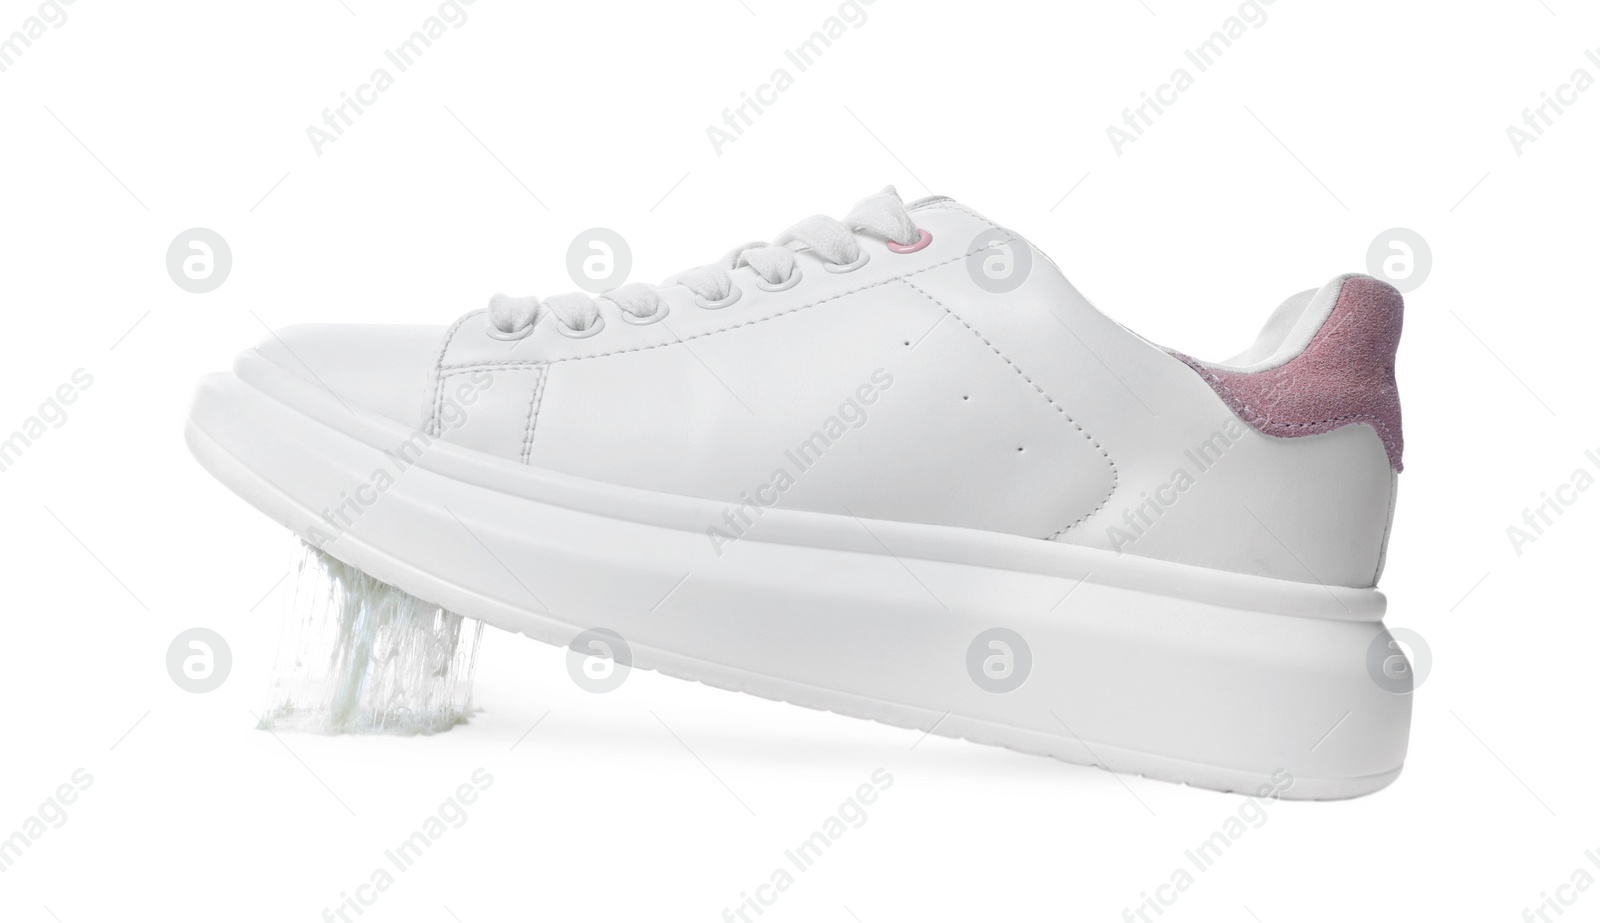 Photo of Shoe with chewing gum on sole against white background